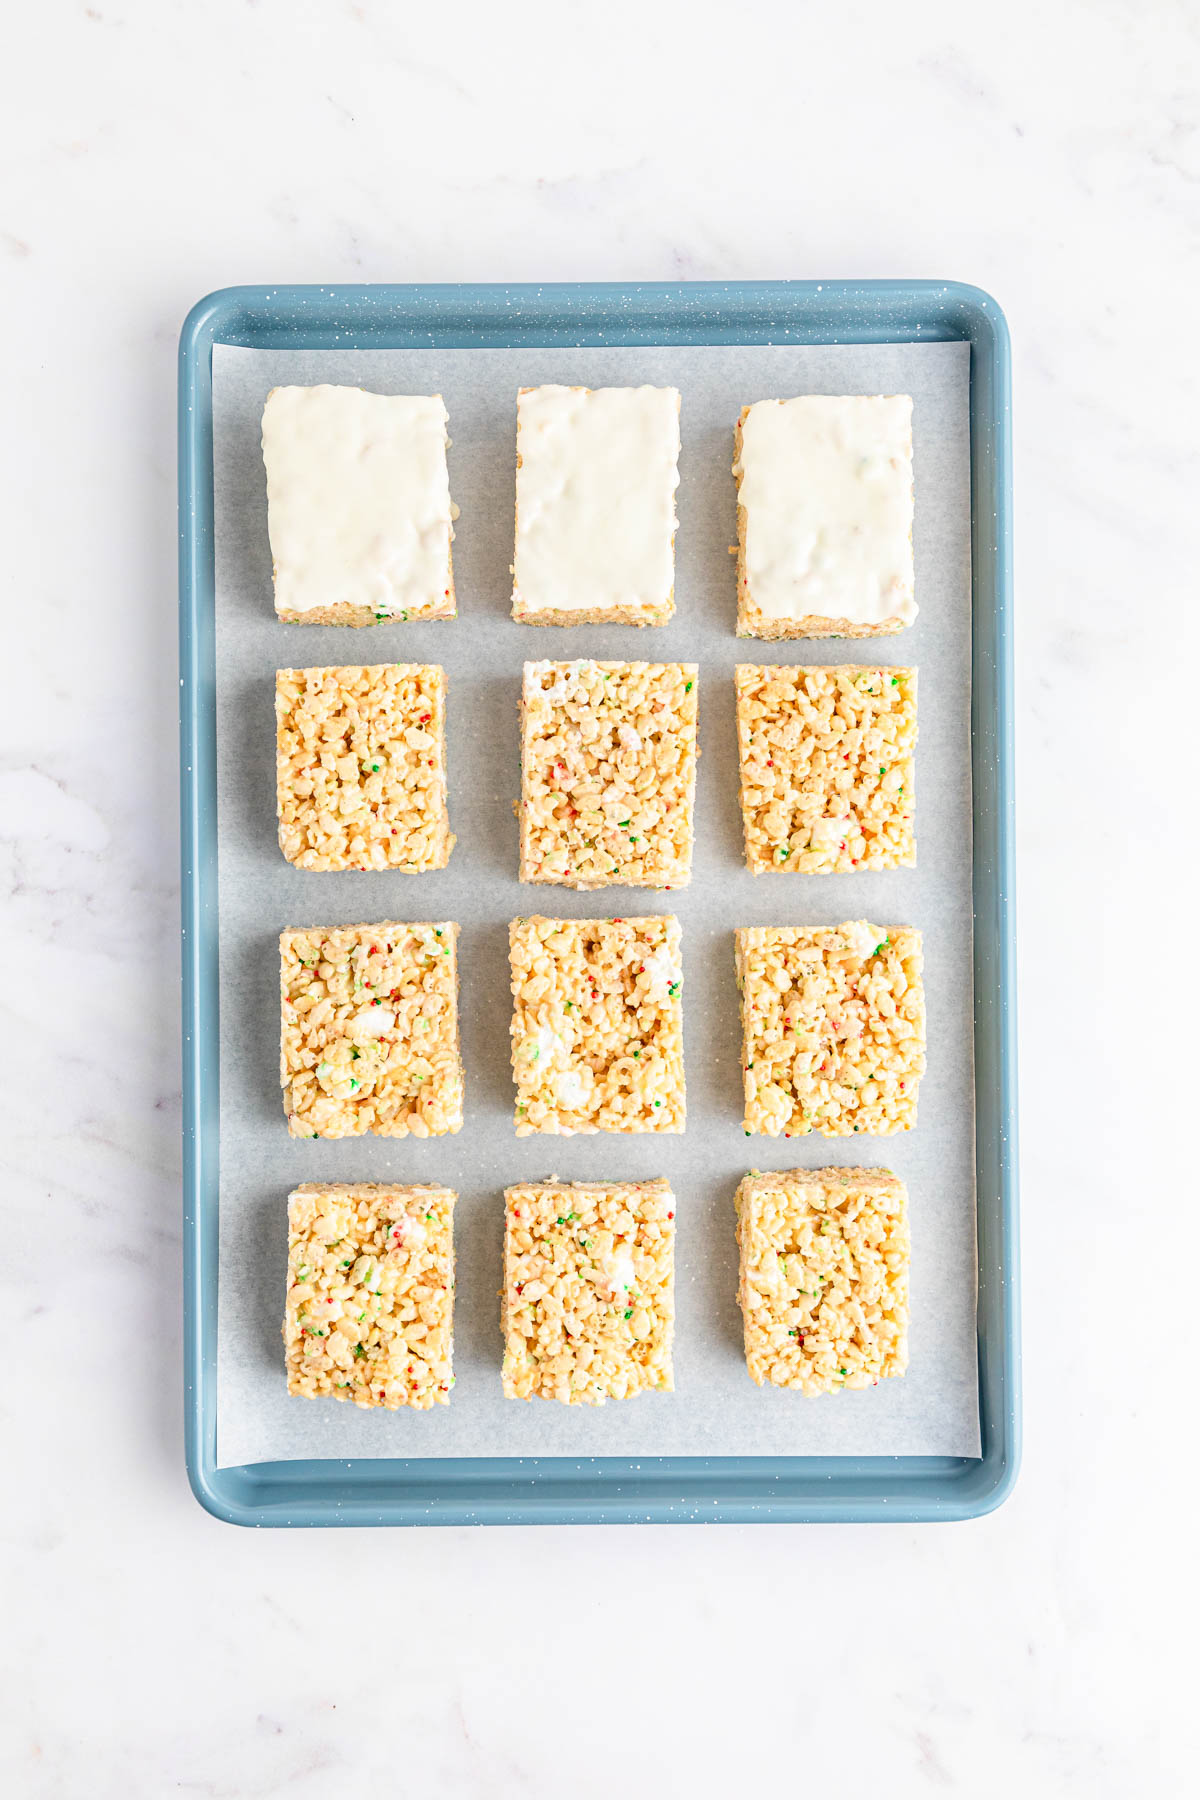 Rice krispie squares on a blue tray.